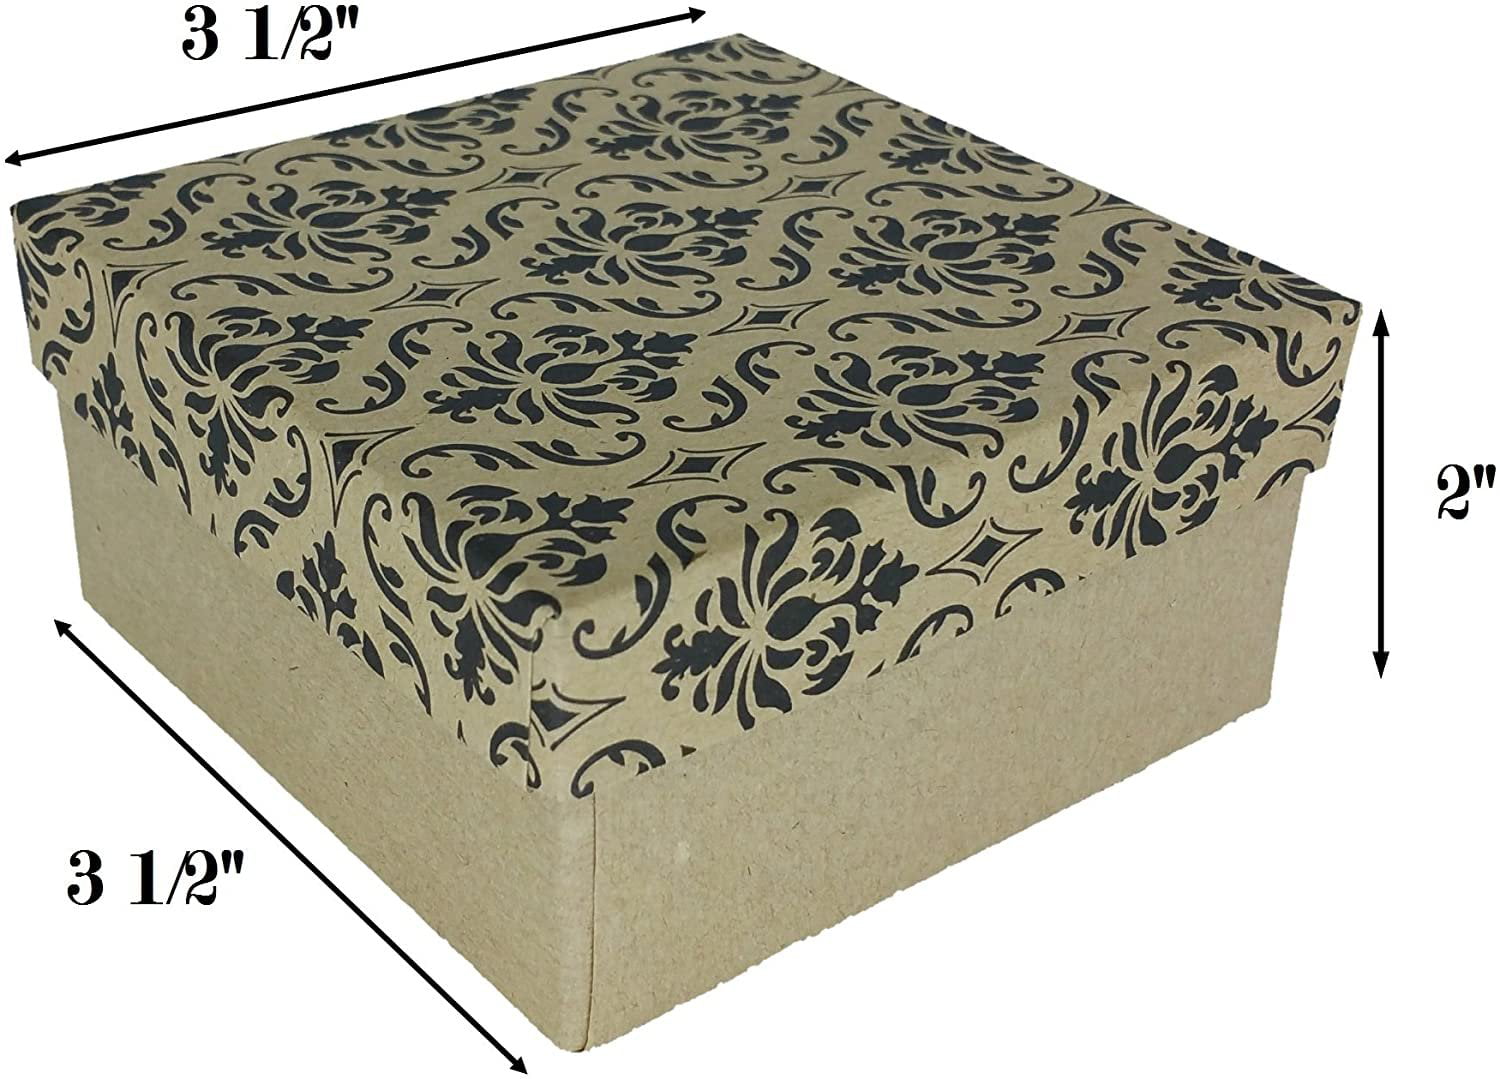 50 Damask Print Gift Jewelry Cotton Filled Boxes 2 1/8" x 1 5/8" x 3/4" Rings 